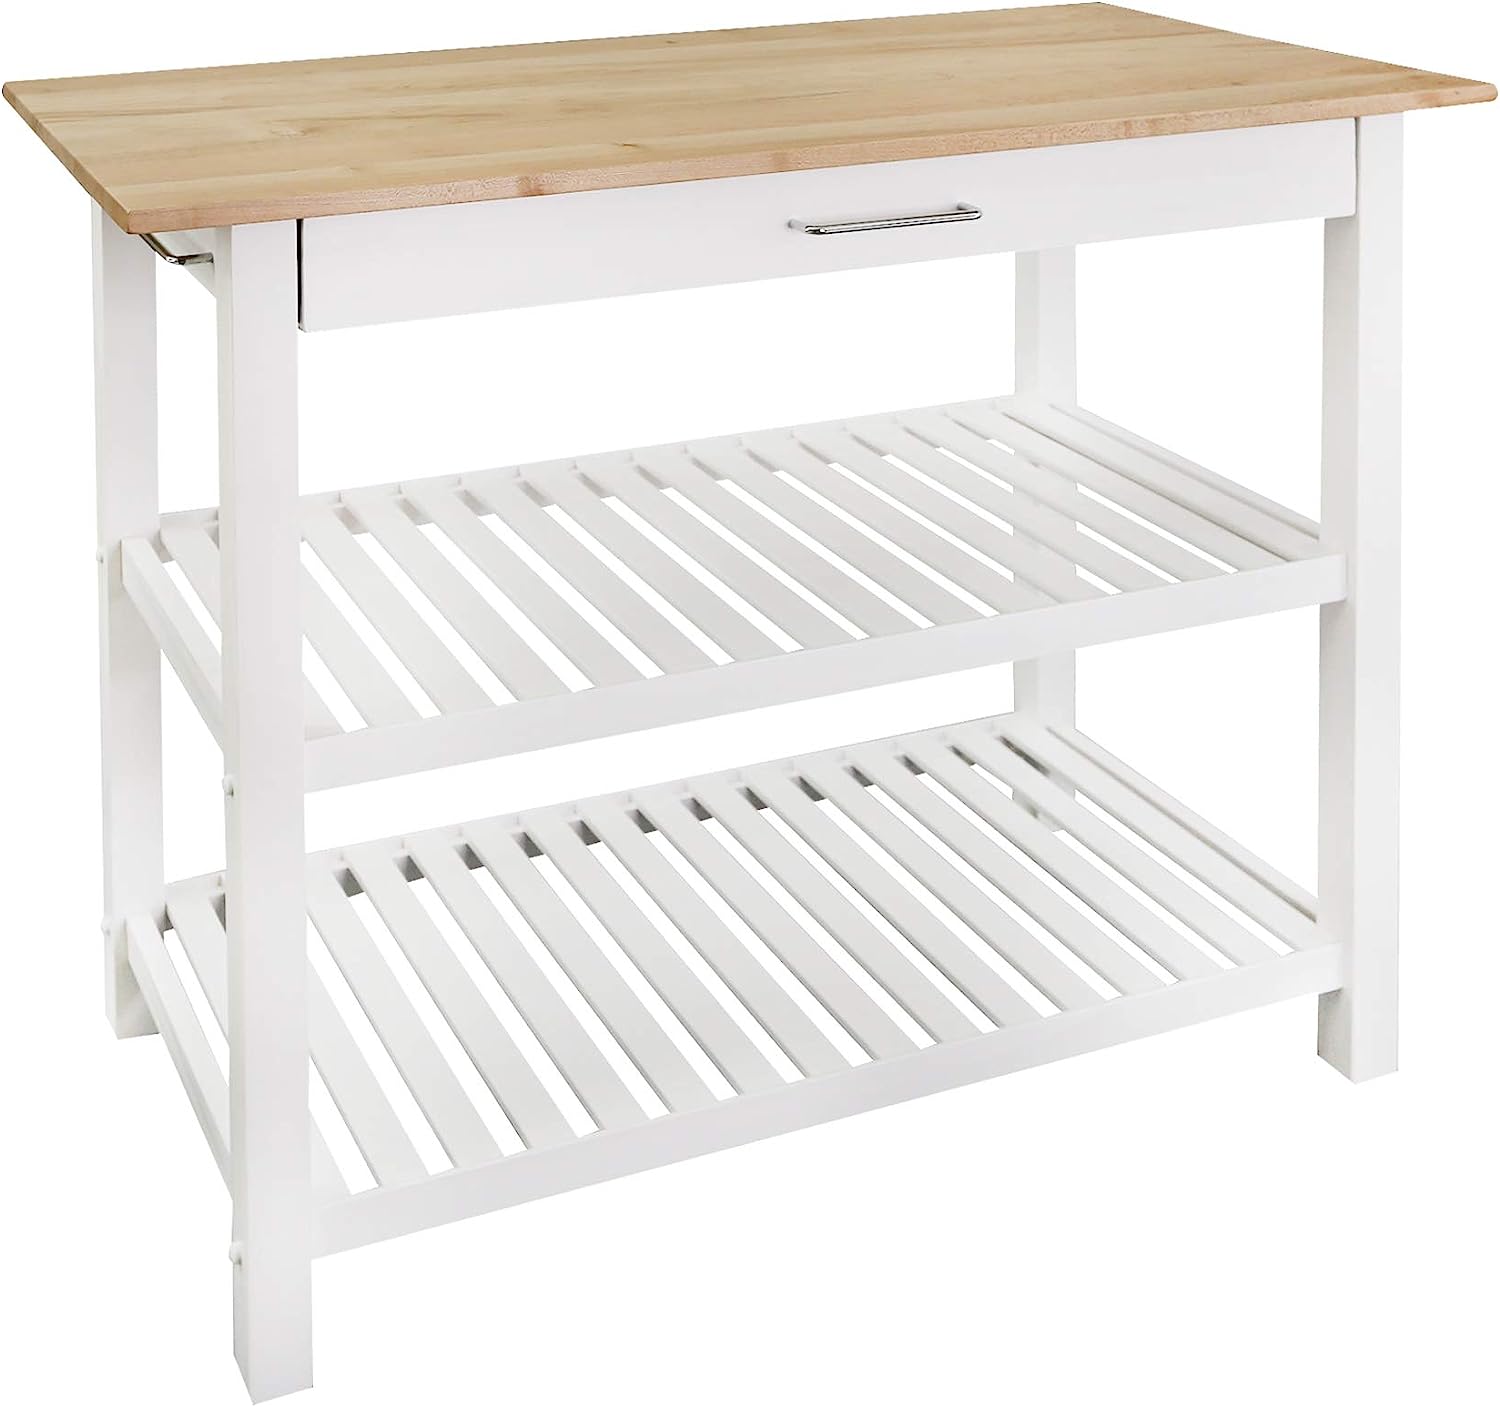 wood for kitchen island comparison tables